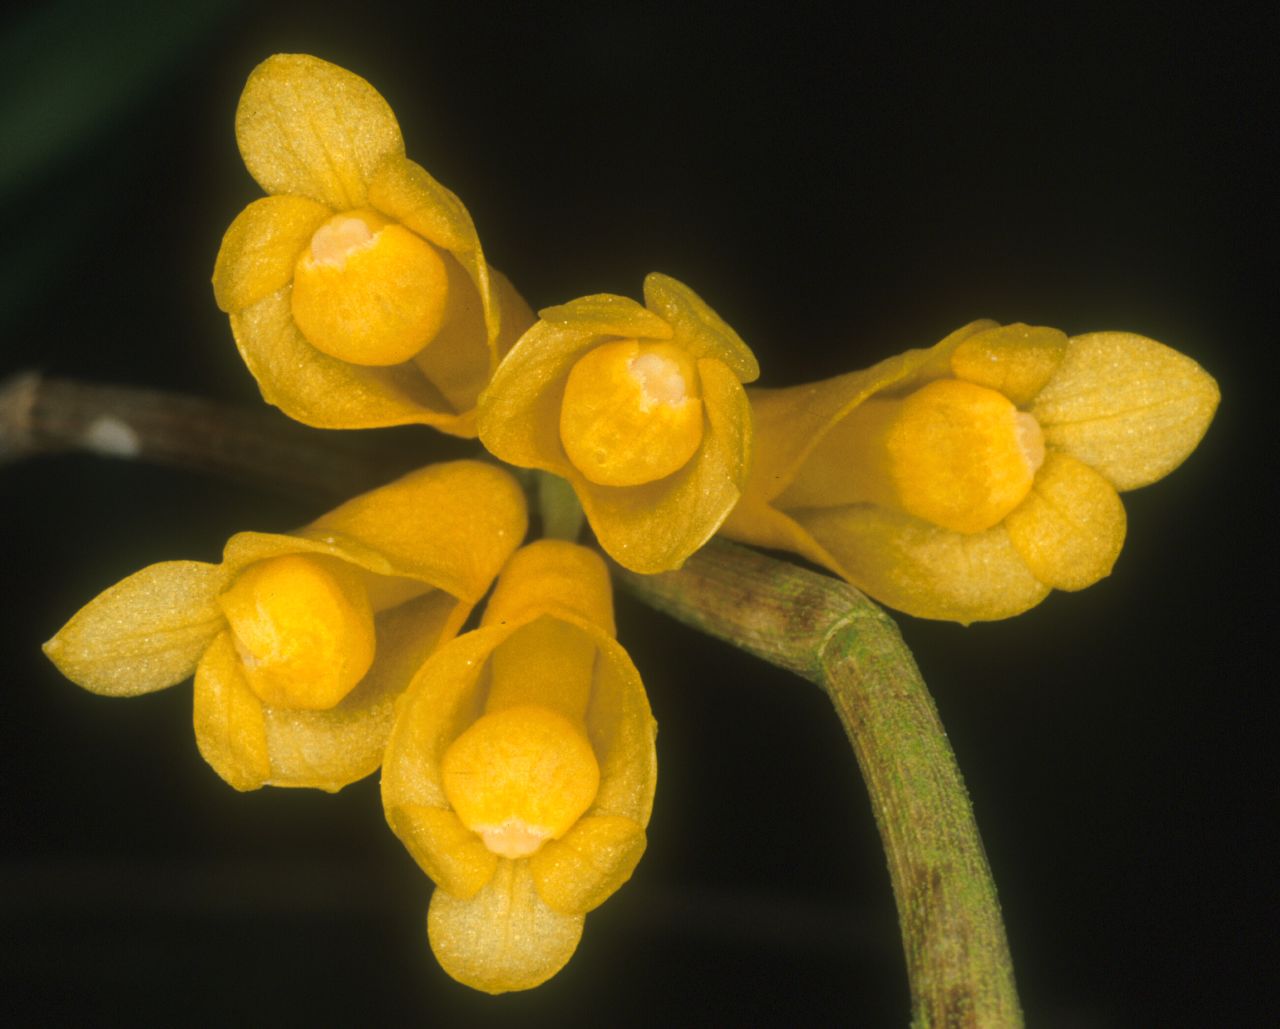 Common Orchid Species